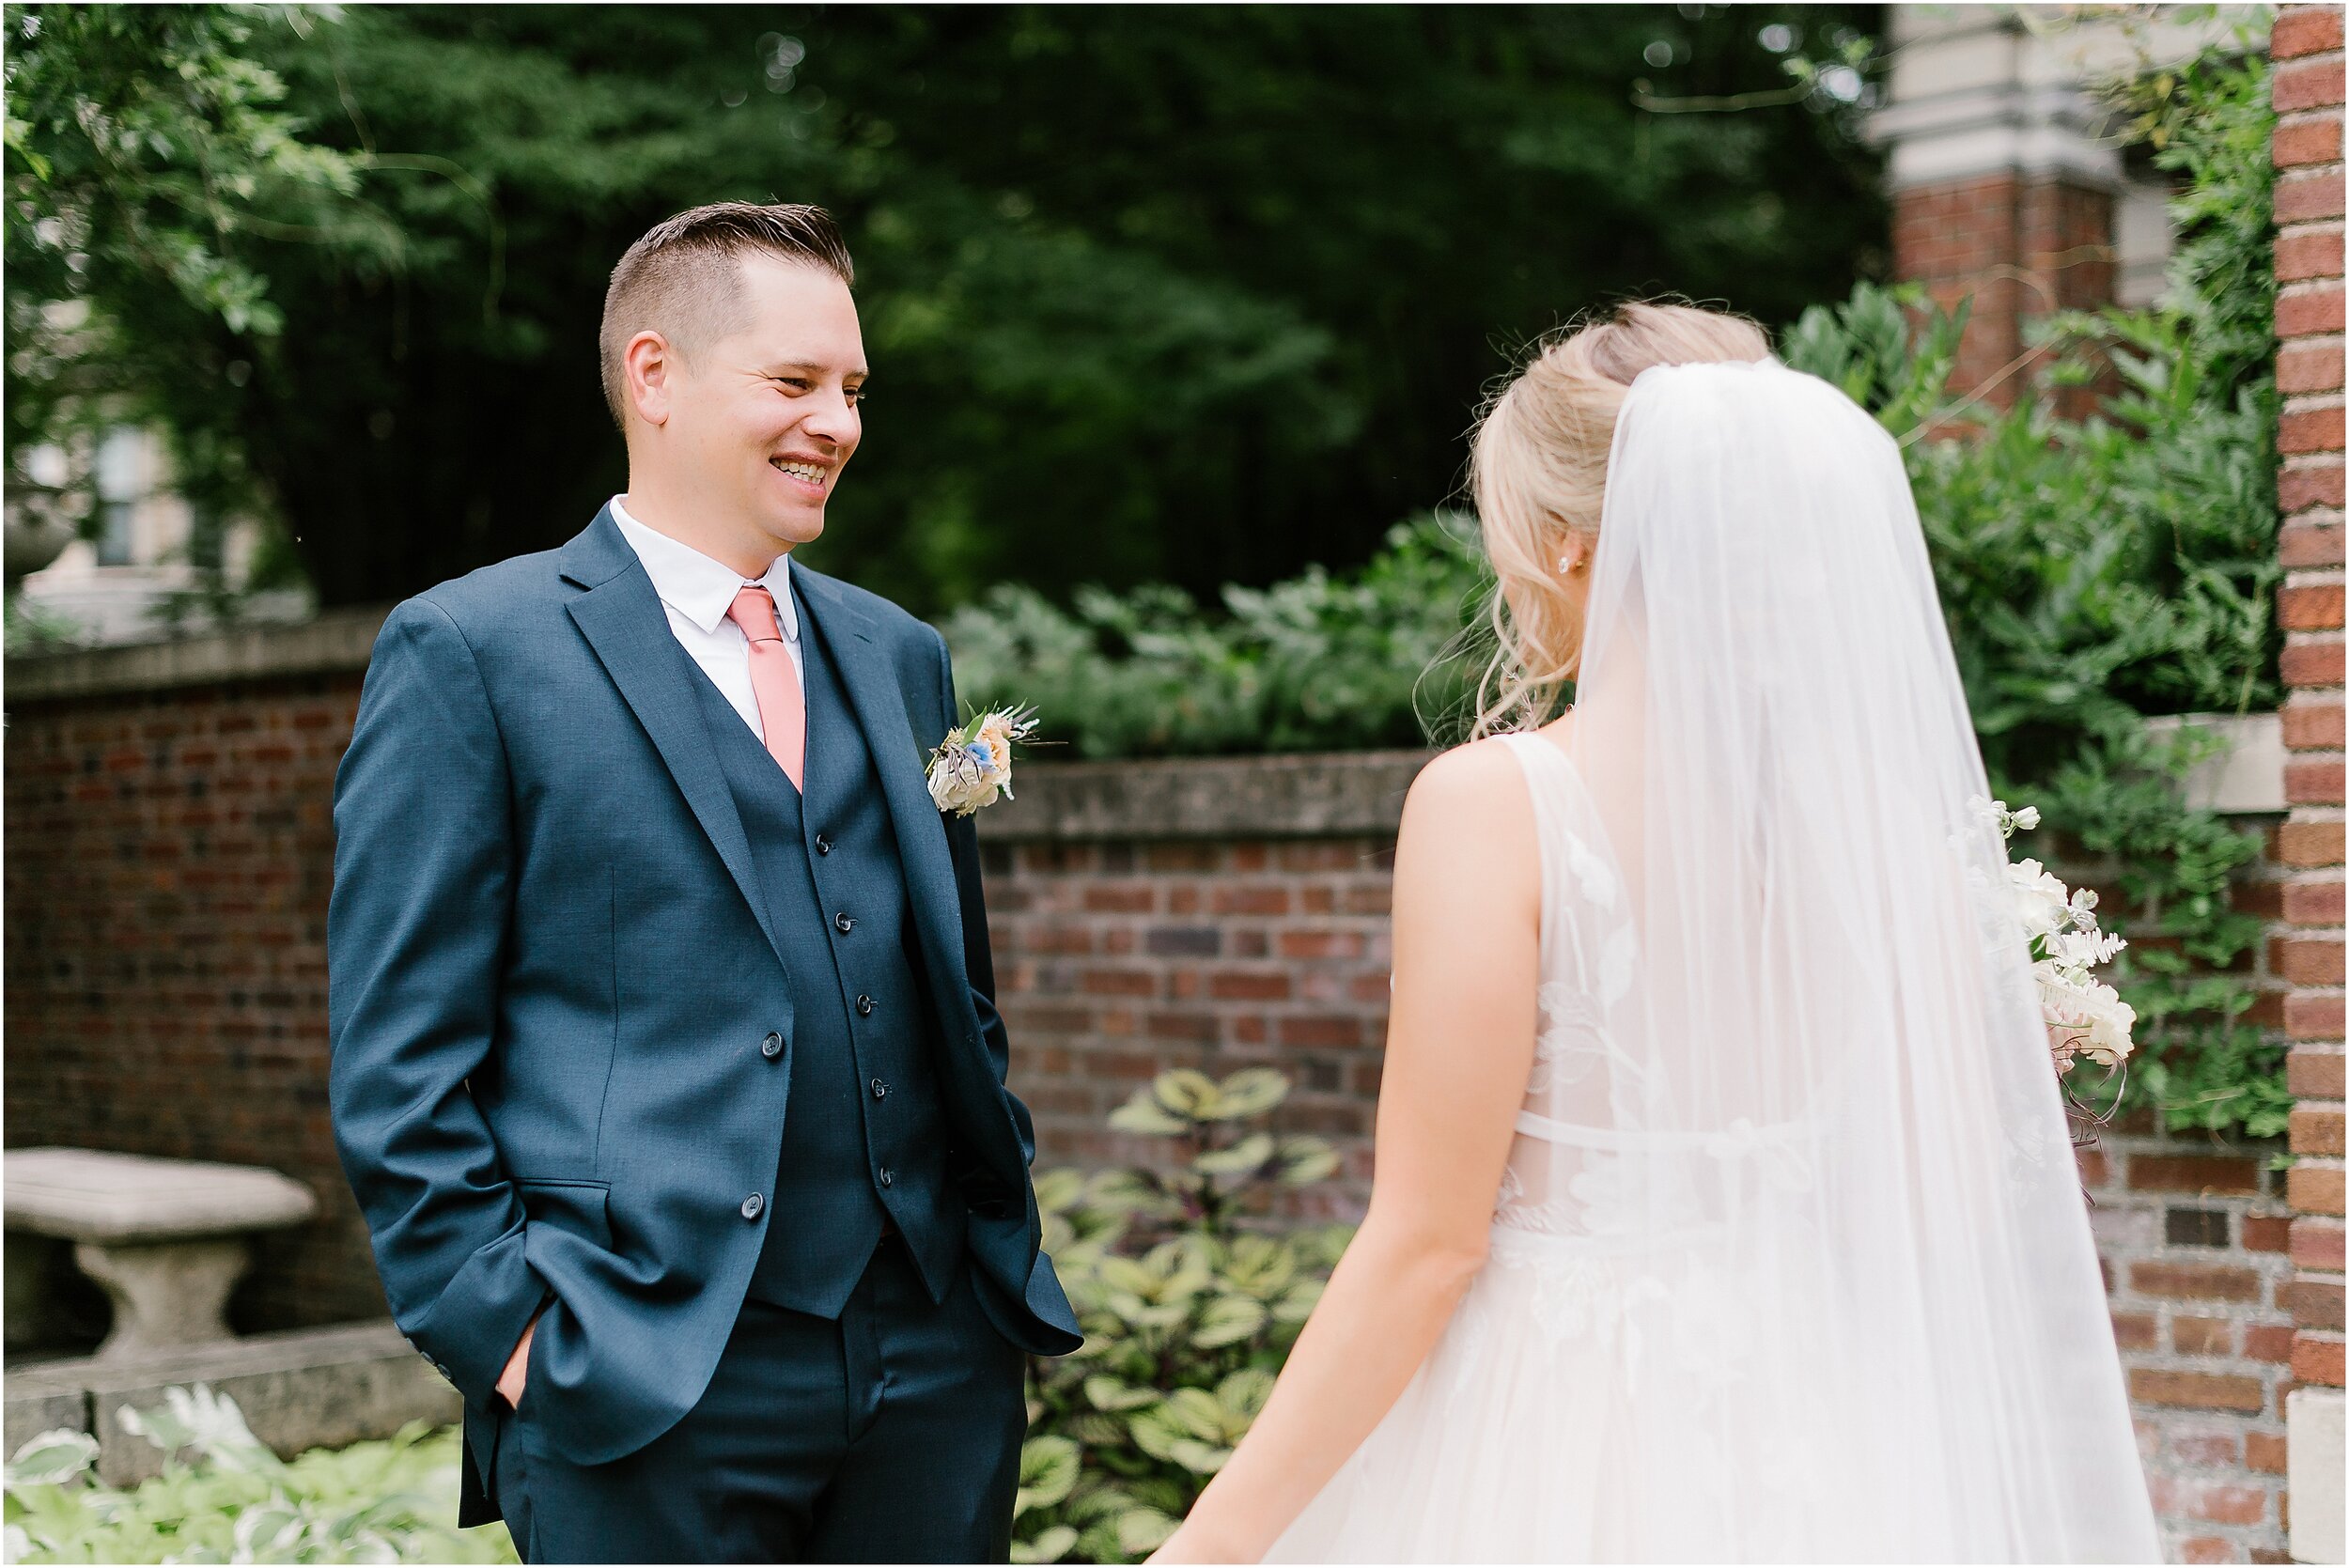 Rebecca Shehorn Photography Colleen and Kyle Inn at Irwin Gardens Wedding-193_The Commons Columbus Inn at Irwin Garden Indianapolis Wedding Photographer.jpg